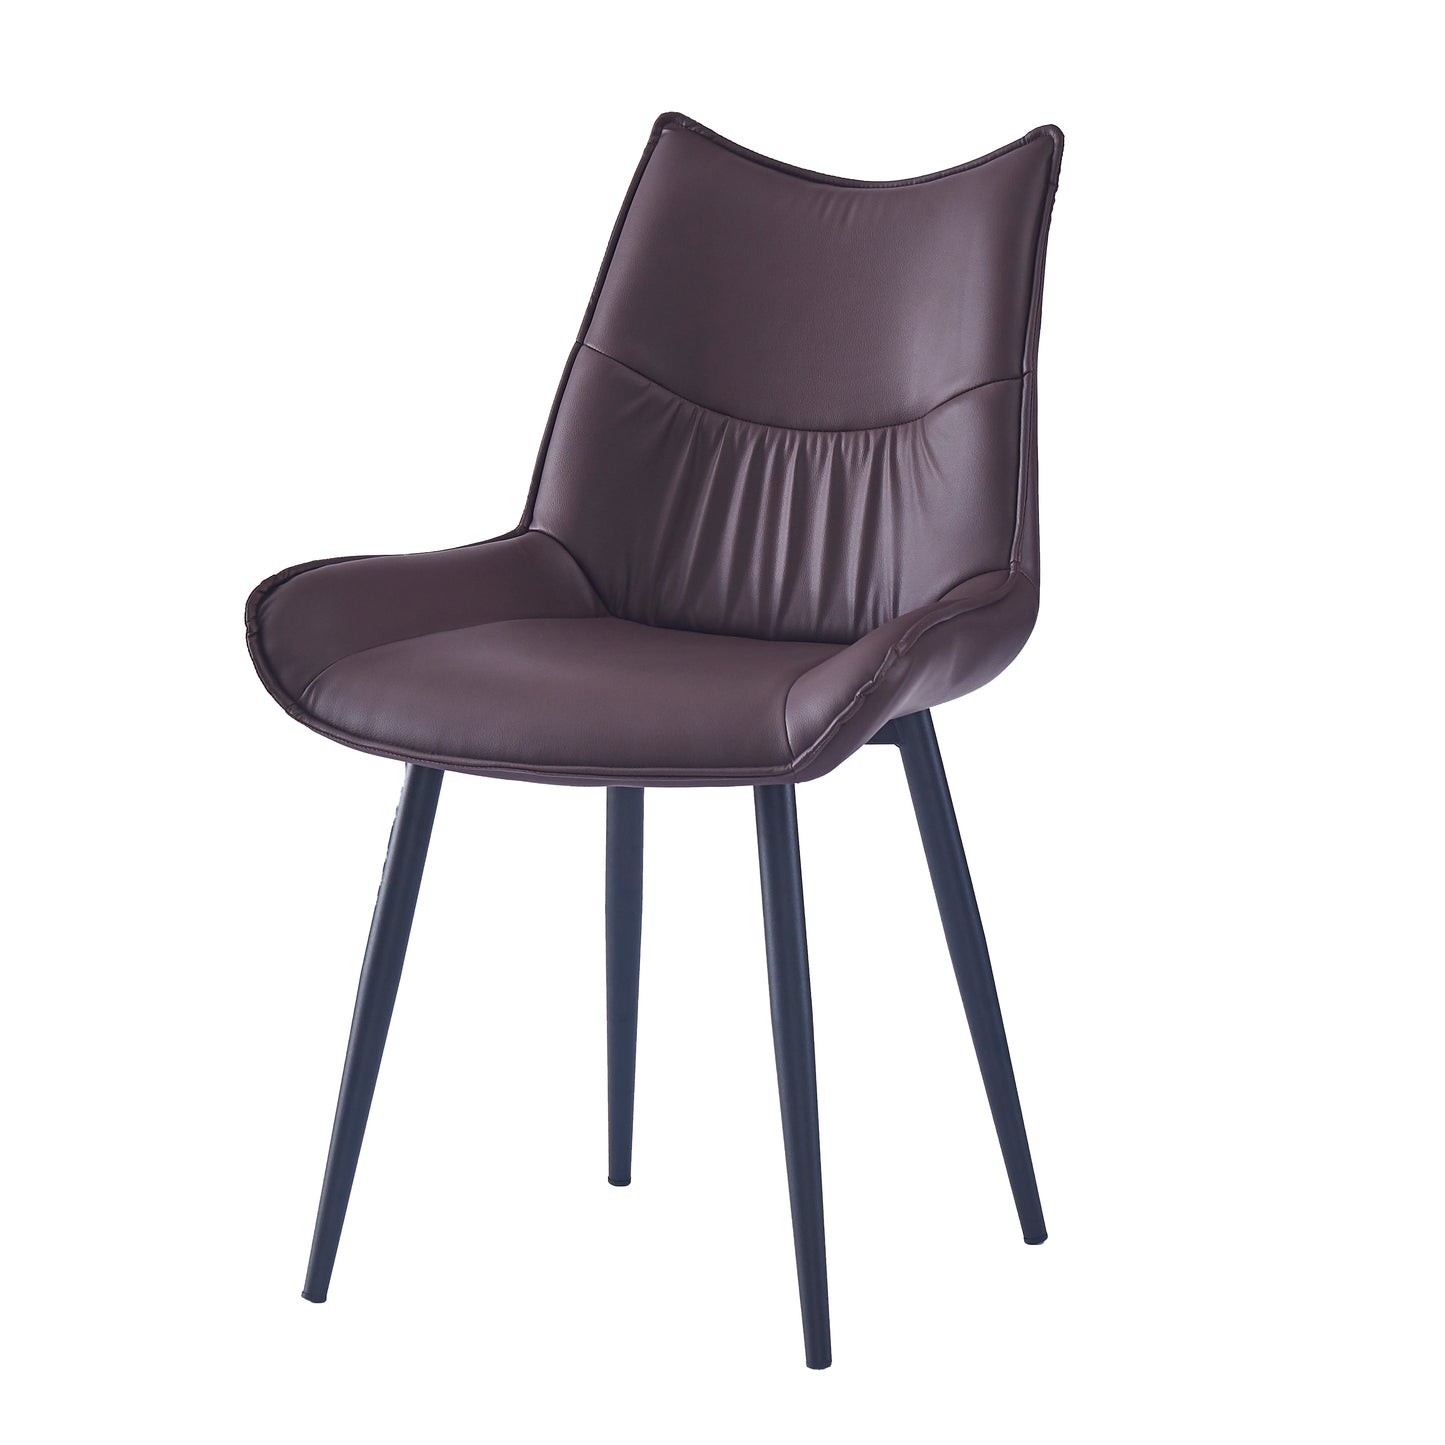 Criterion Jett Dining Chair 830mm PU Leather Cushioned Seat, Carbon Steel Frame Brown